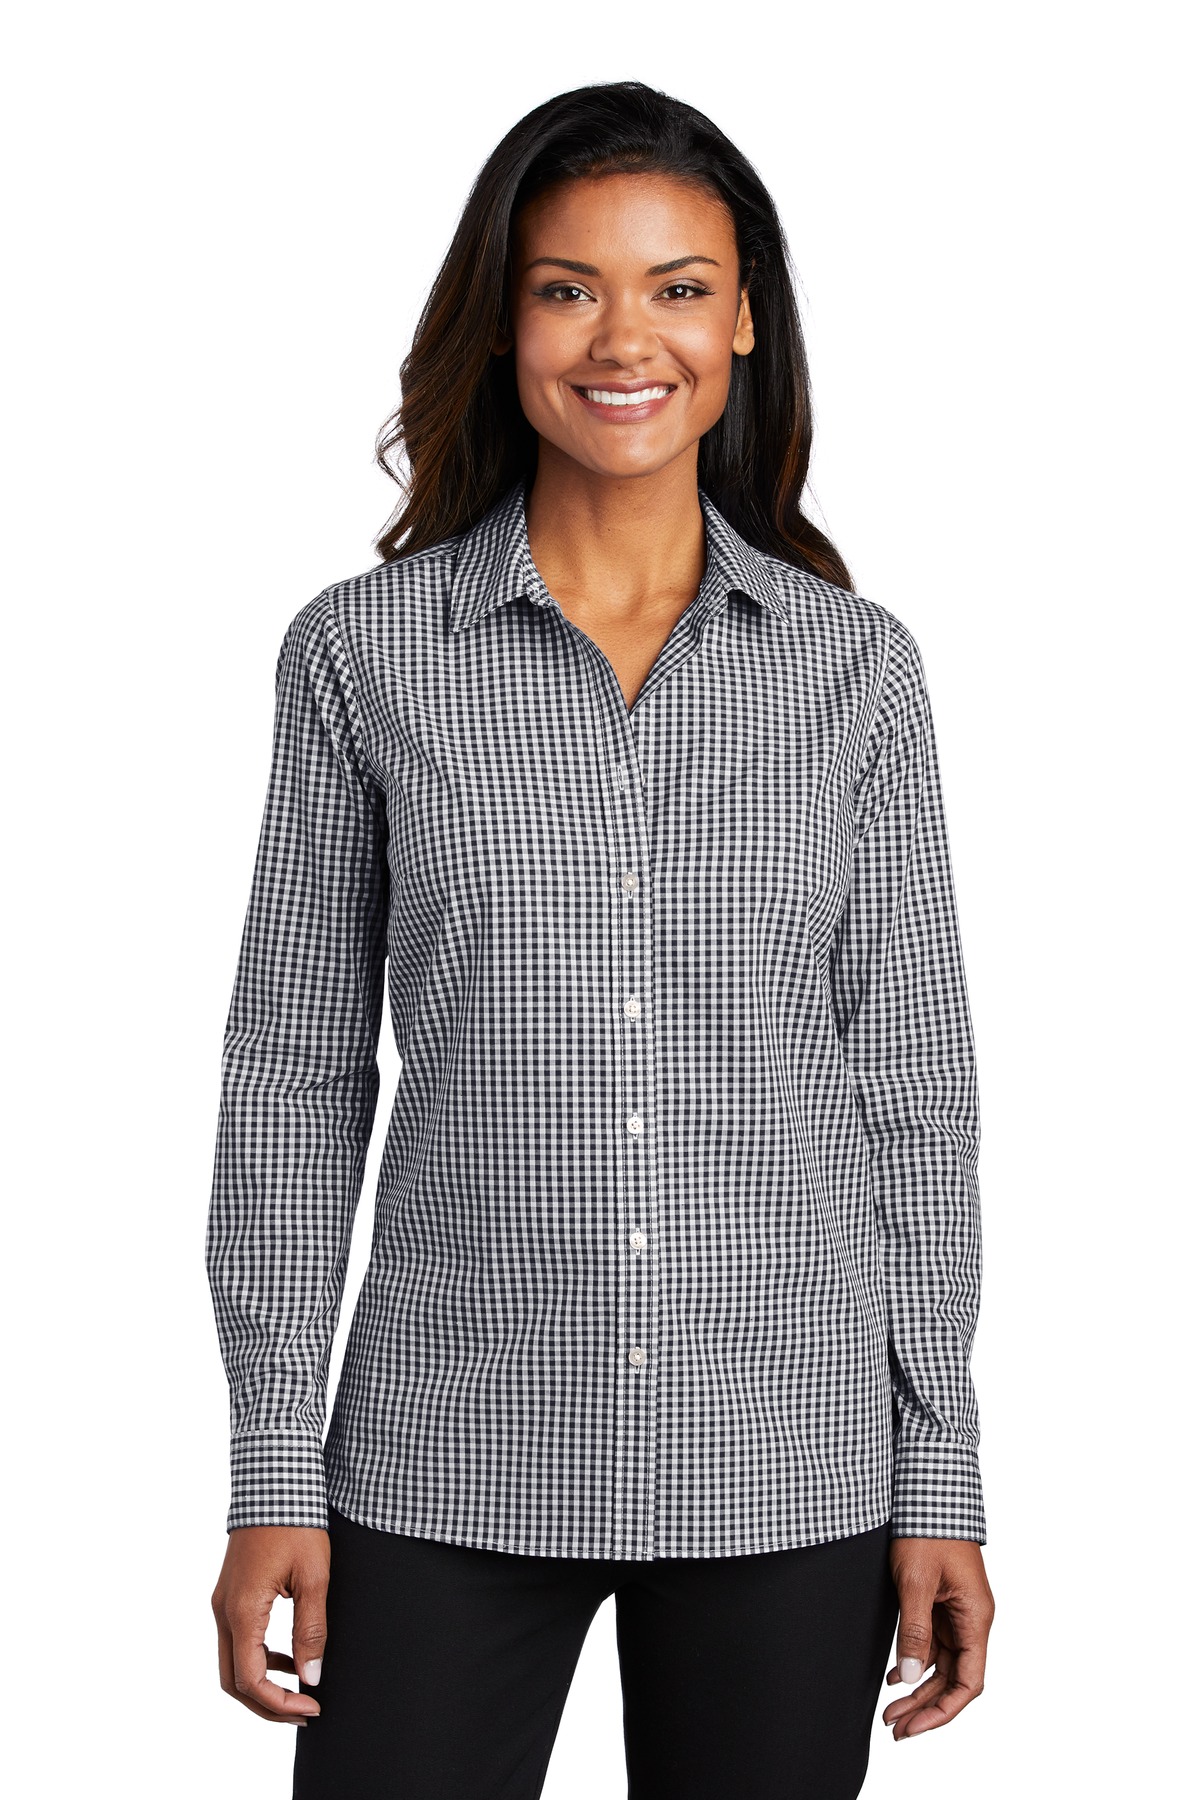 Port Authority Ladies Broadcloth Gingham Easy Care Shirt-Port Authority